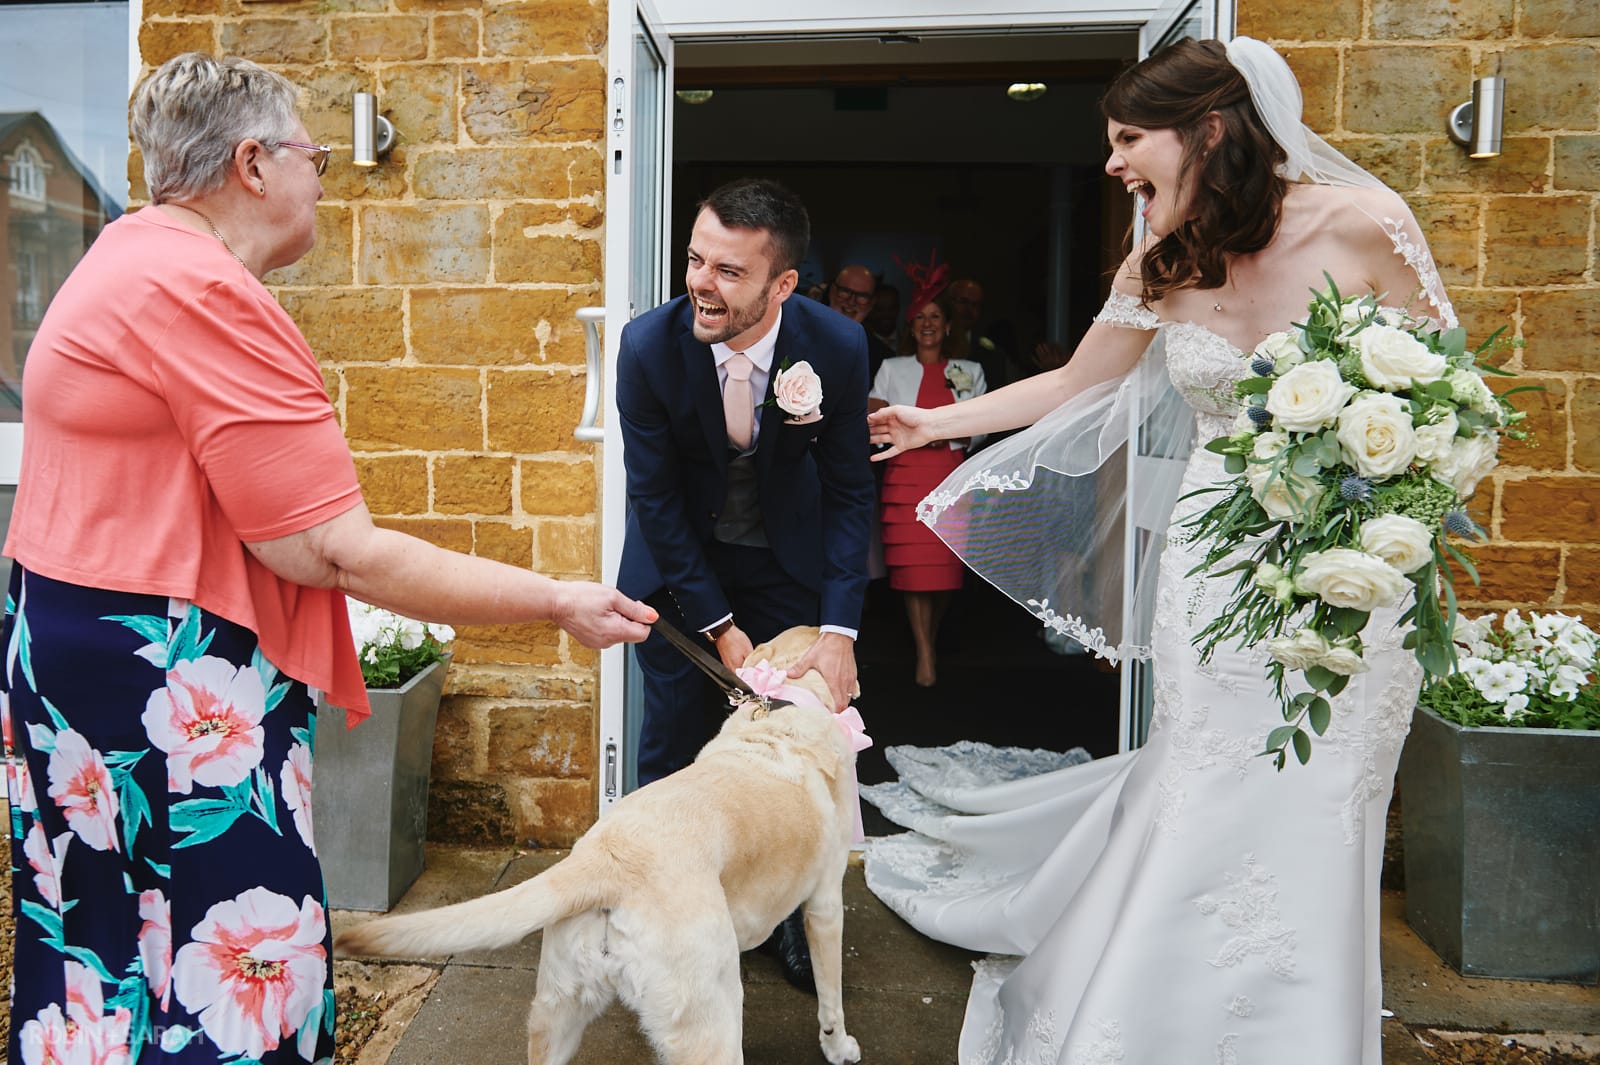 Bride and groom laughing as friend meets them with dog outside church wedding ceremony